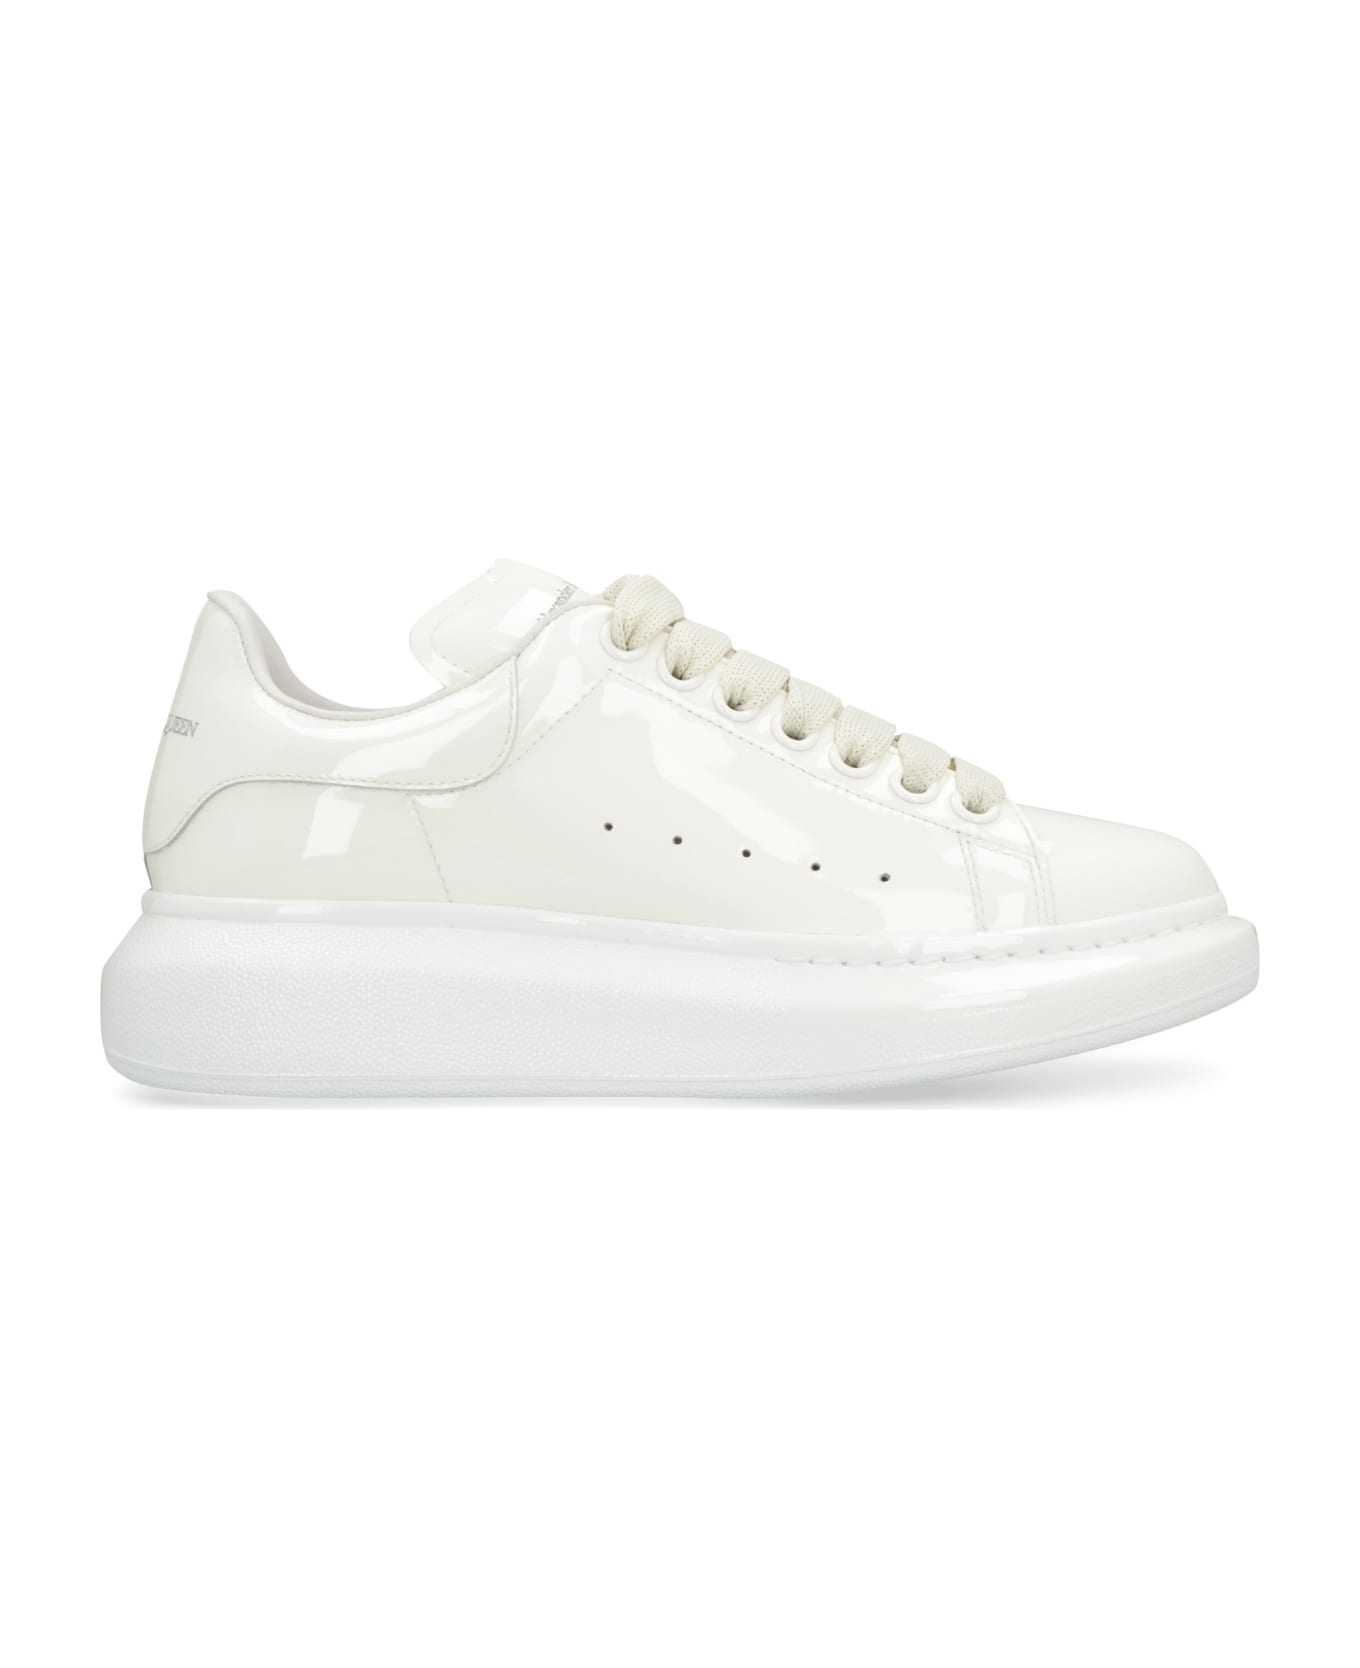 Alexander McQueen Larry Patent Leather Sneakers - White ウェッジシューズ